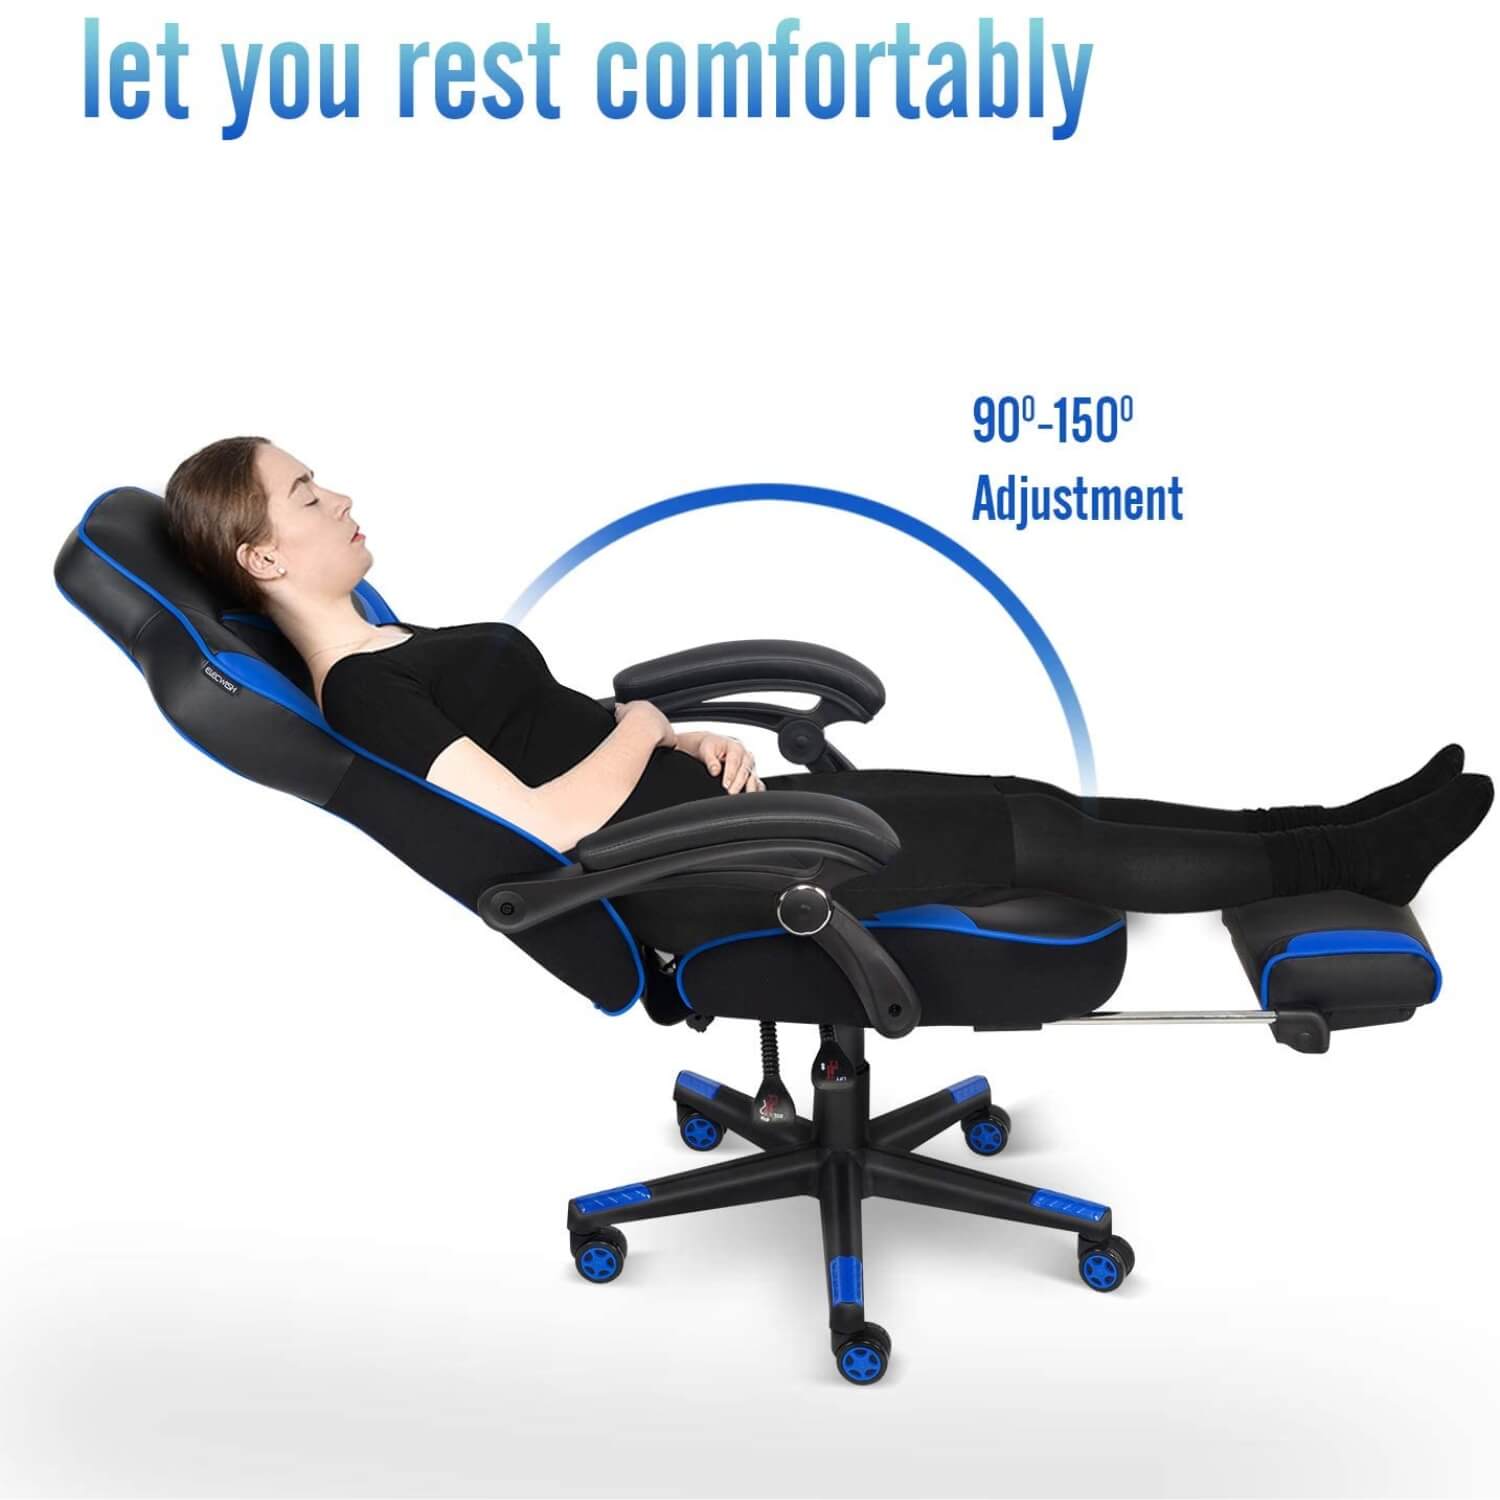 Elecwish blue massage gaming chair with footrest OC112 can let you rest comfortably